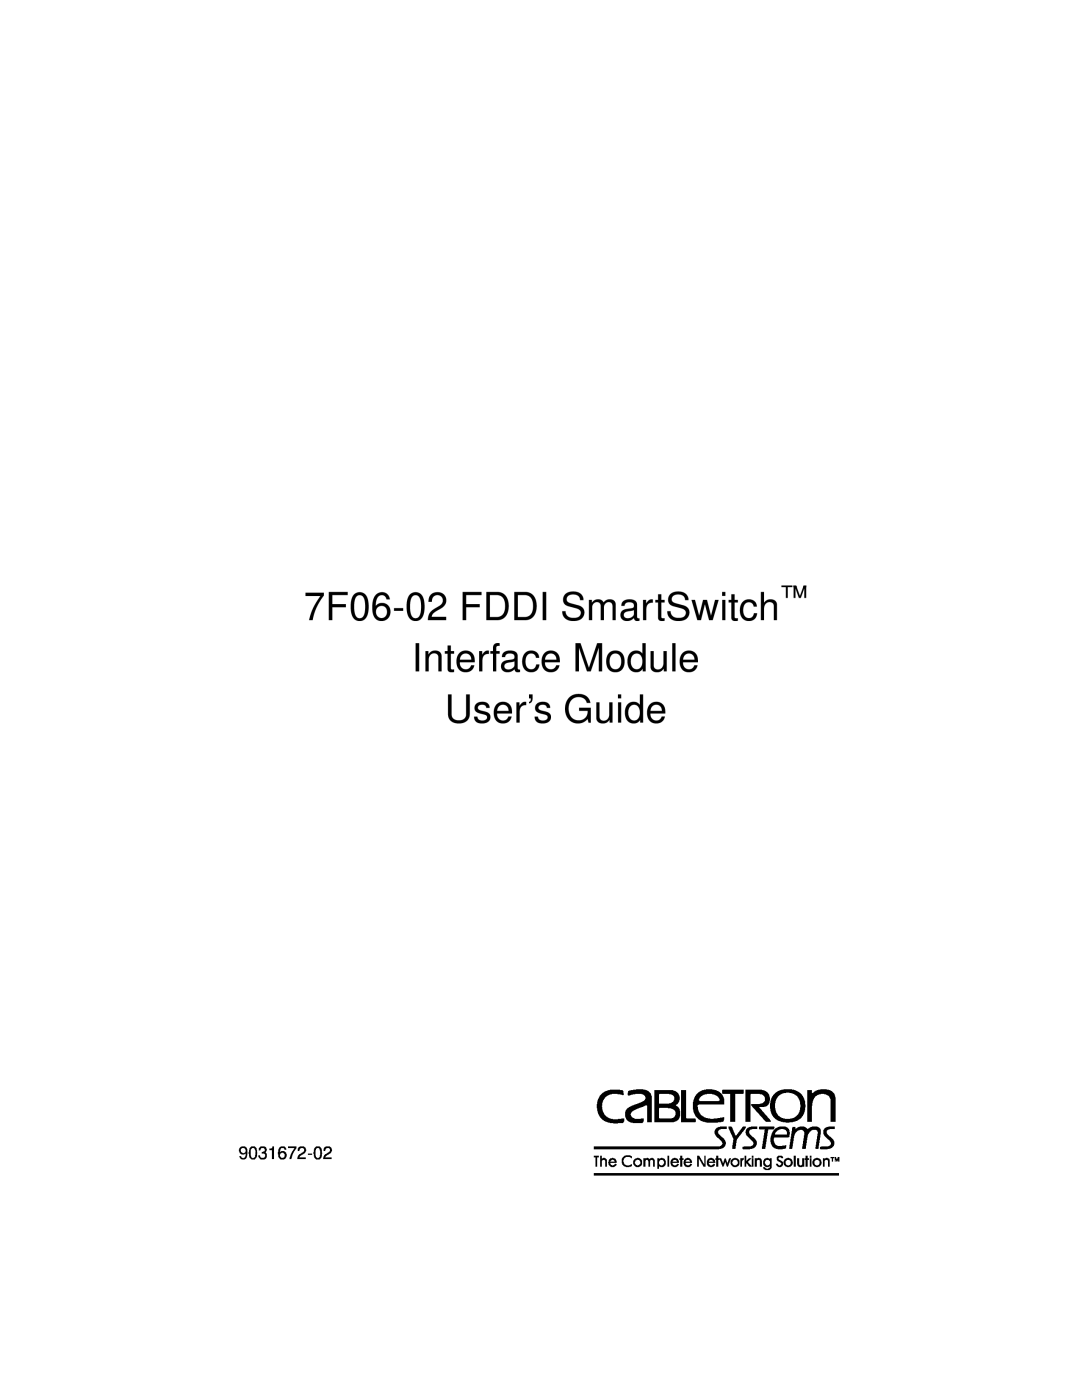 Cabletron Systems manual 7F06-02 FDDI SmartSwitch, Interface Module User’s Guide 